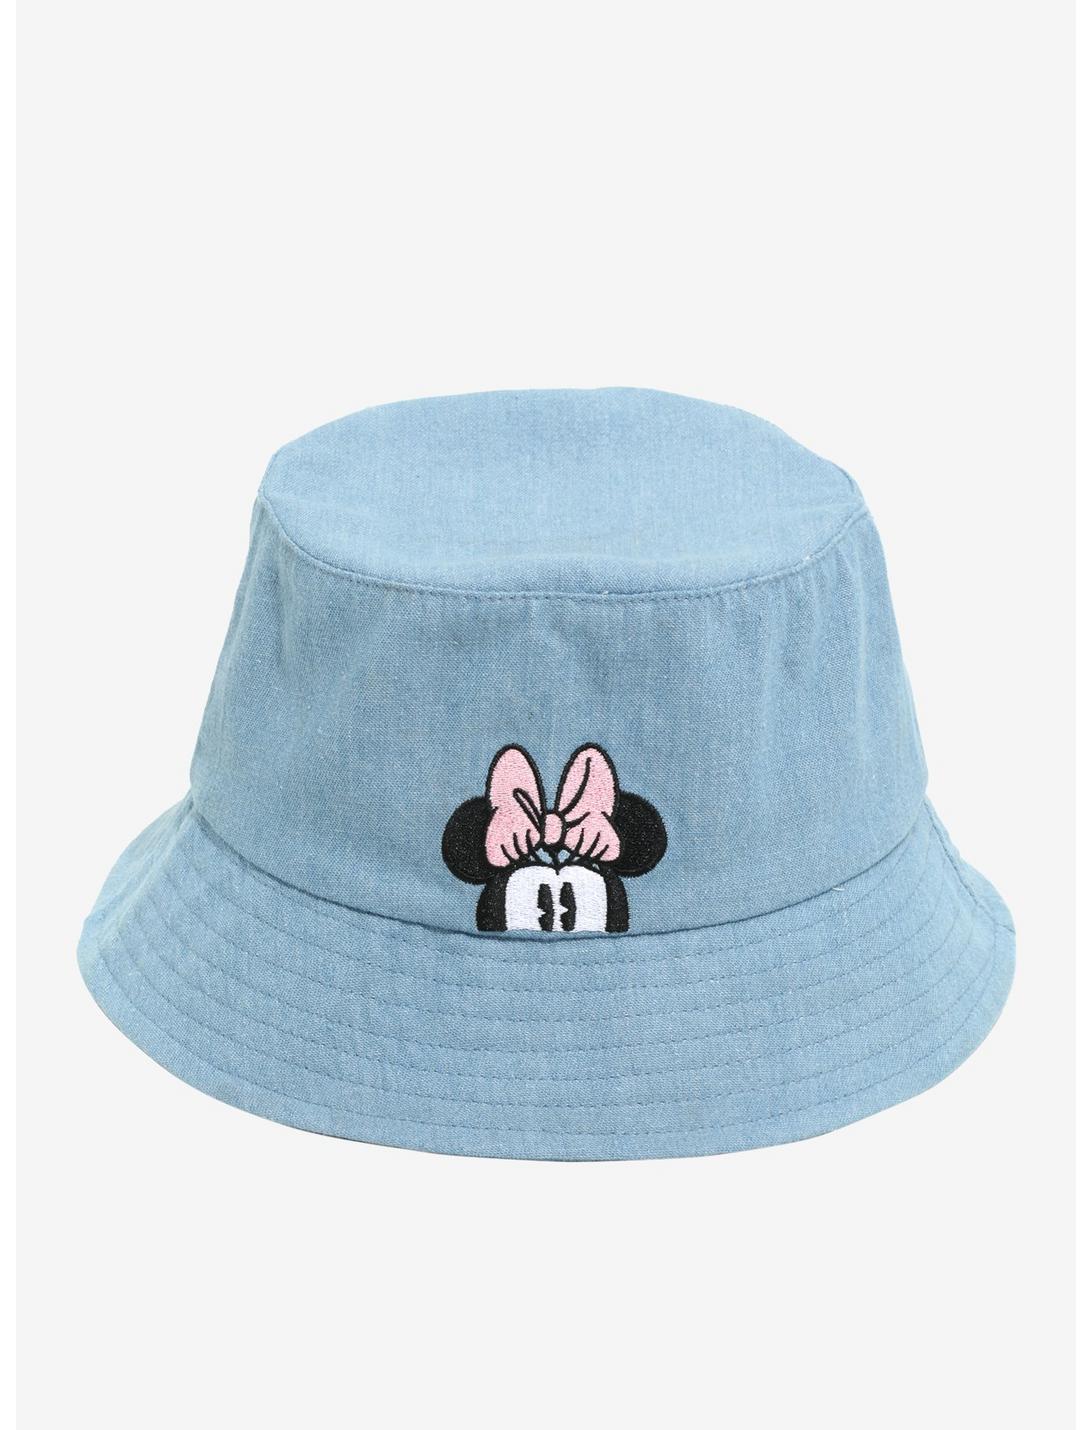 Disney Sweet Minnie Mouse Bucket Hat for Kids Pink